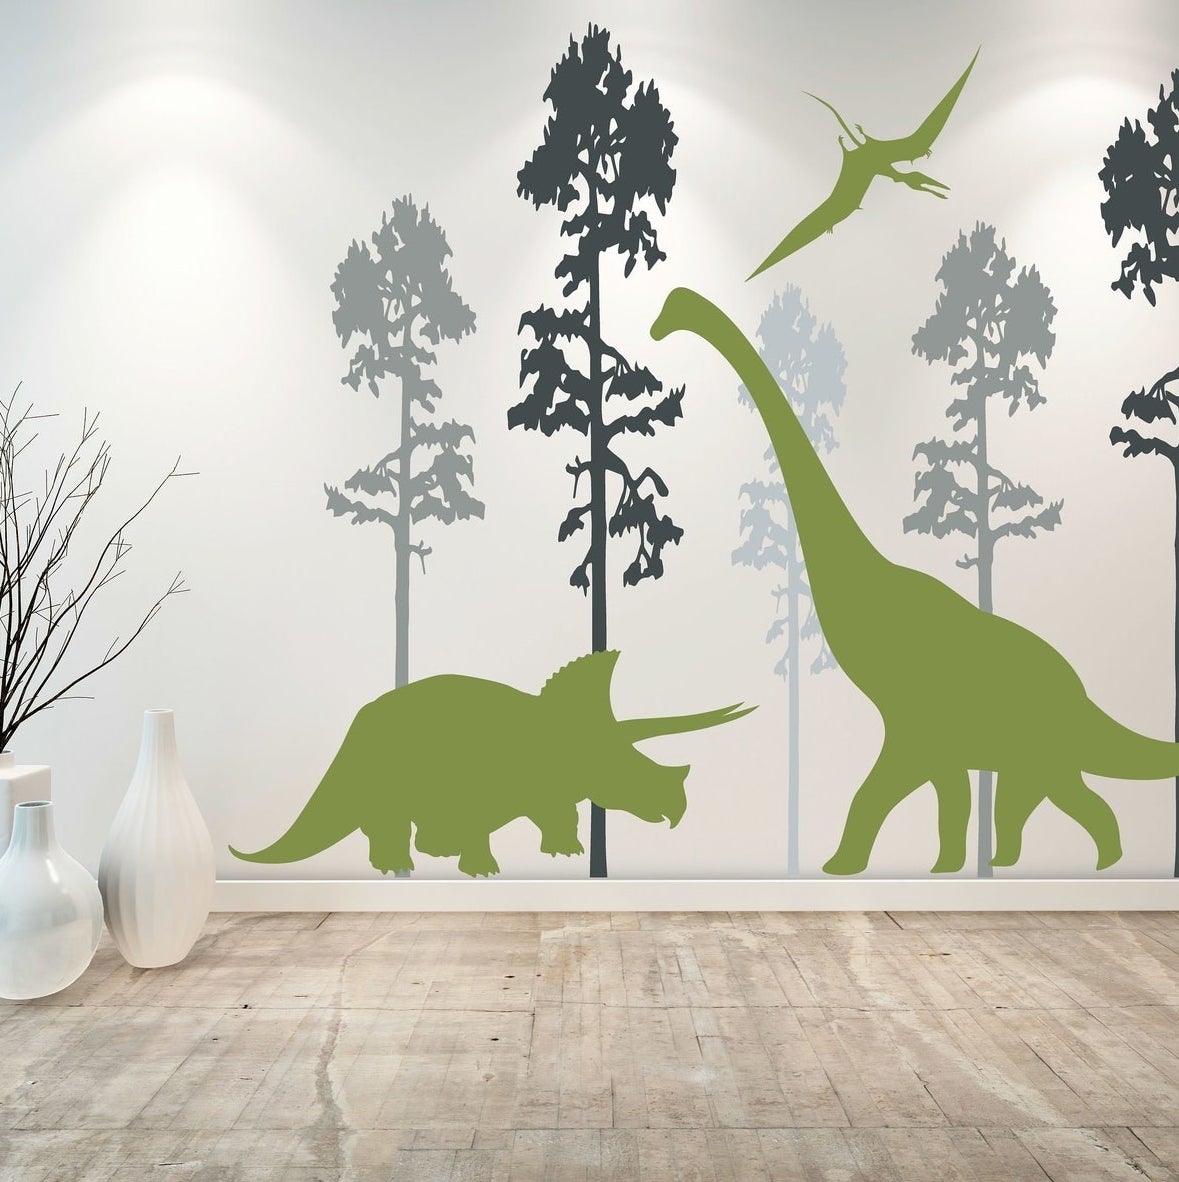 Three green dinosaur wall decals with trees in various shades of blue